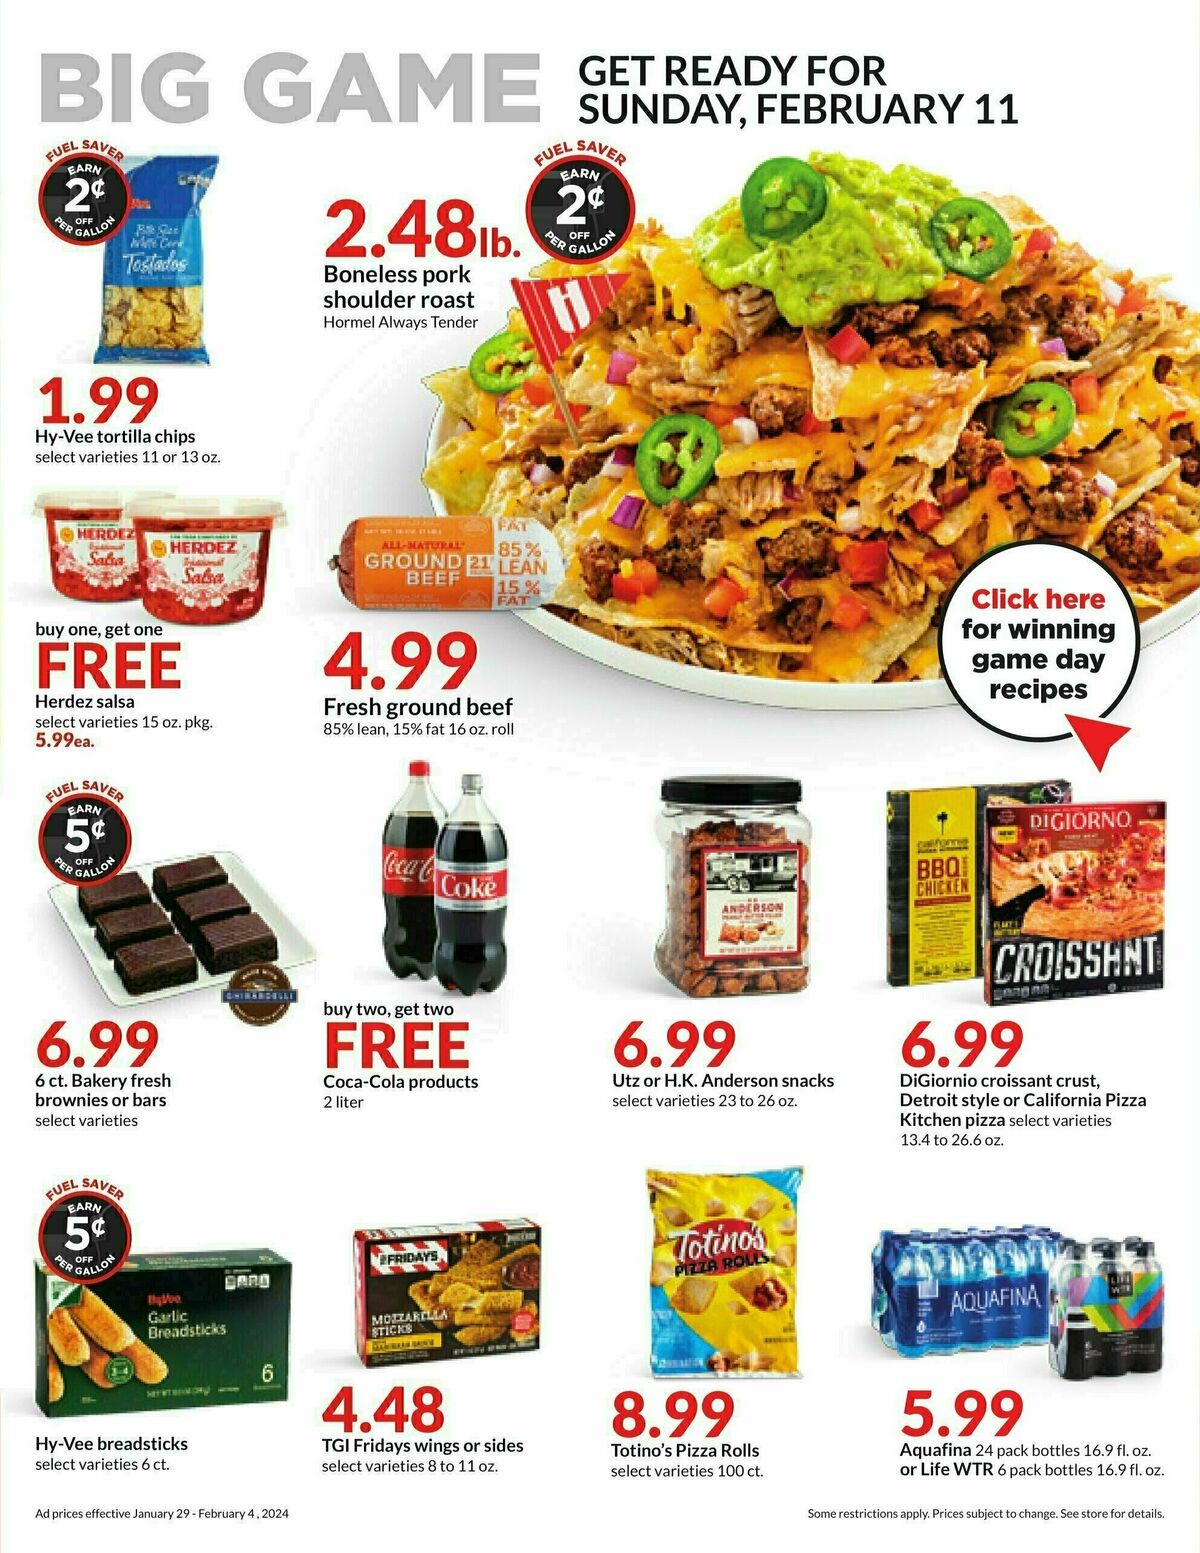 Hy-Vee Weekly Ad from January 29